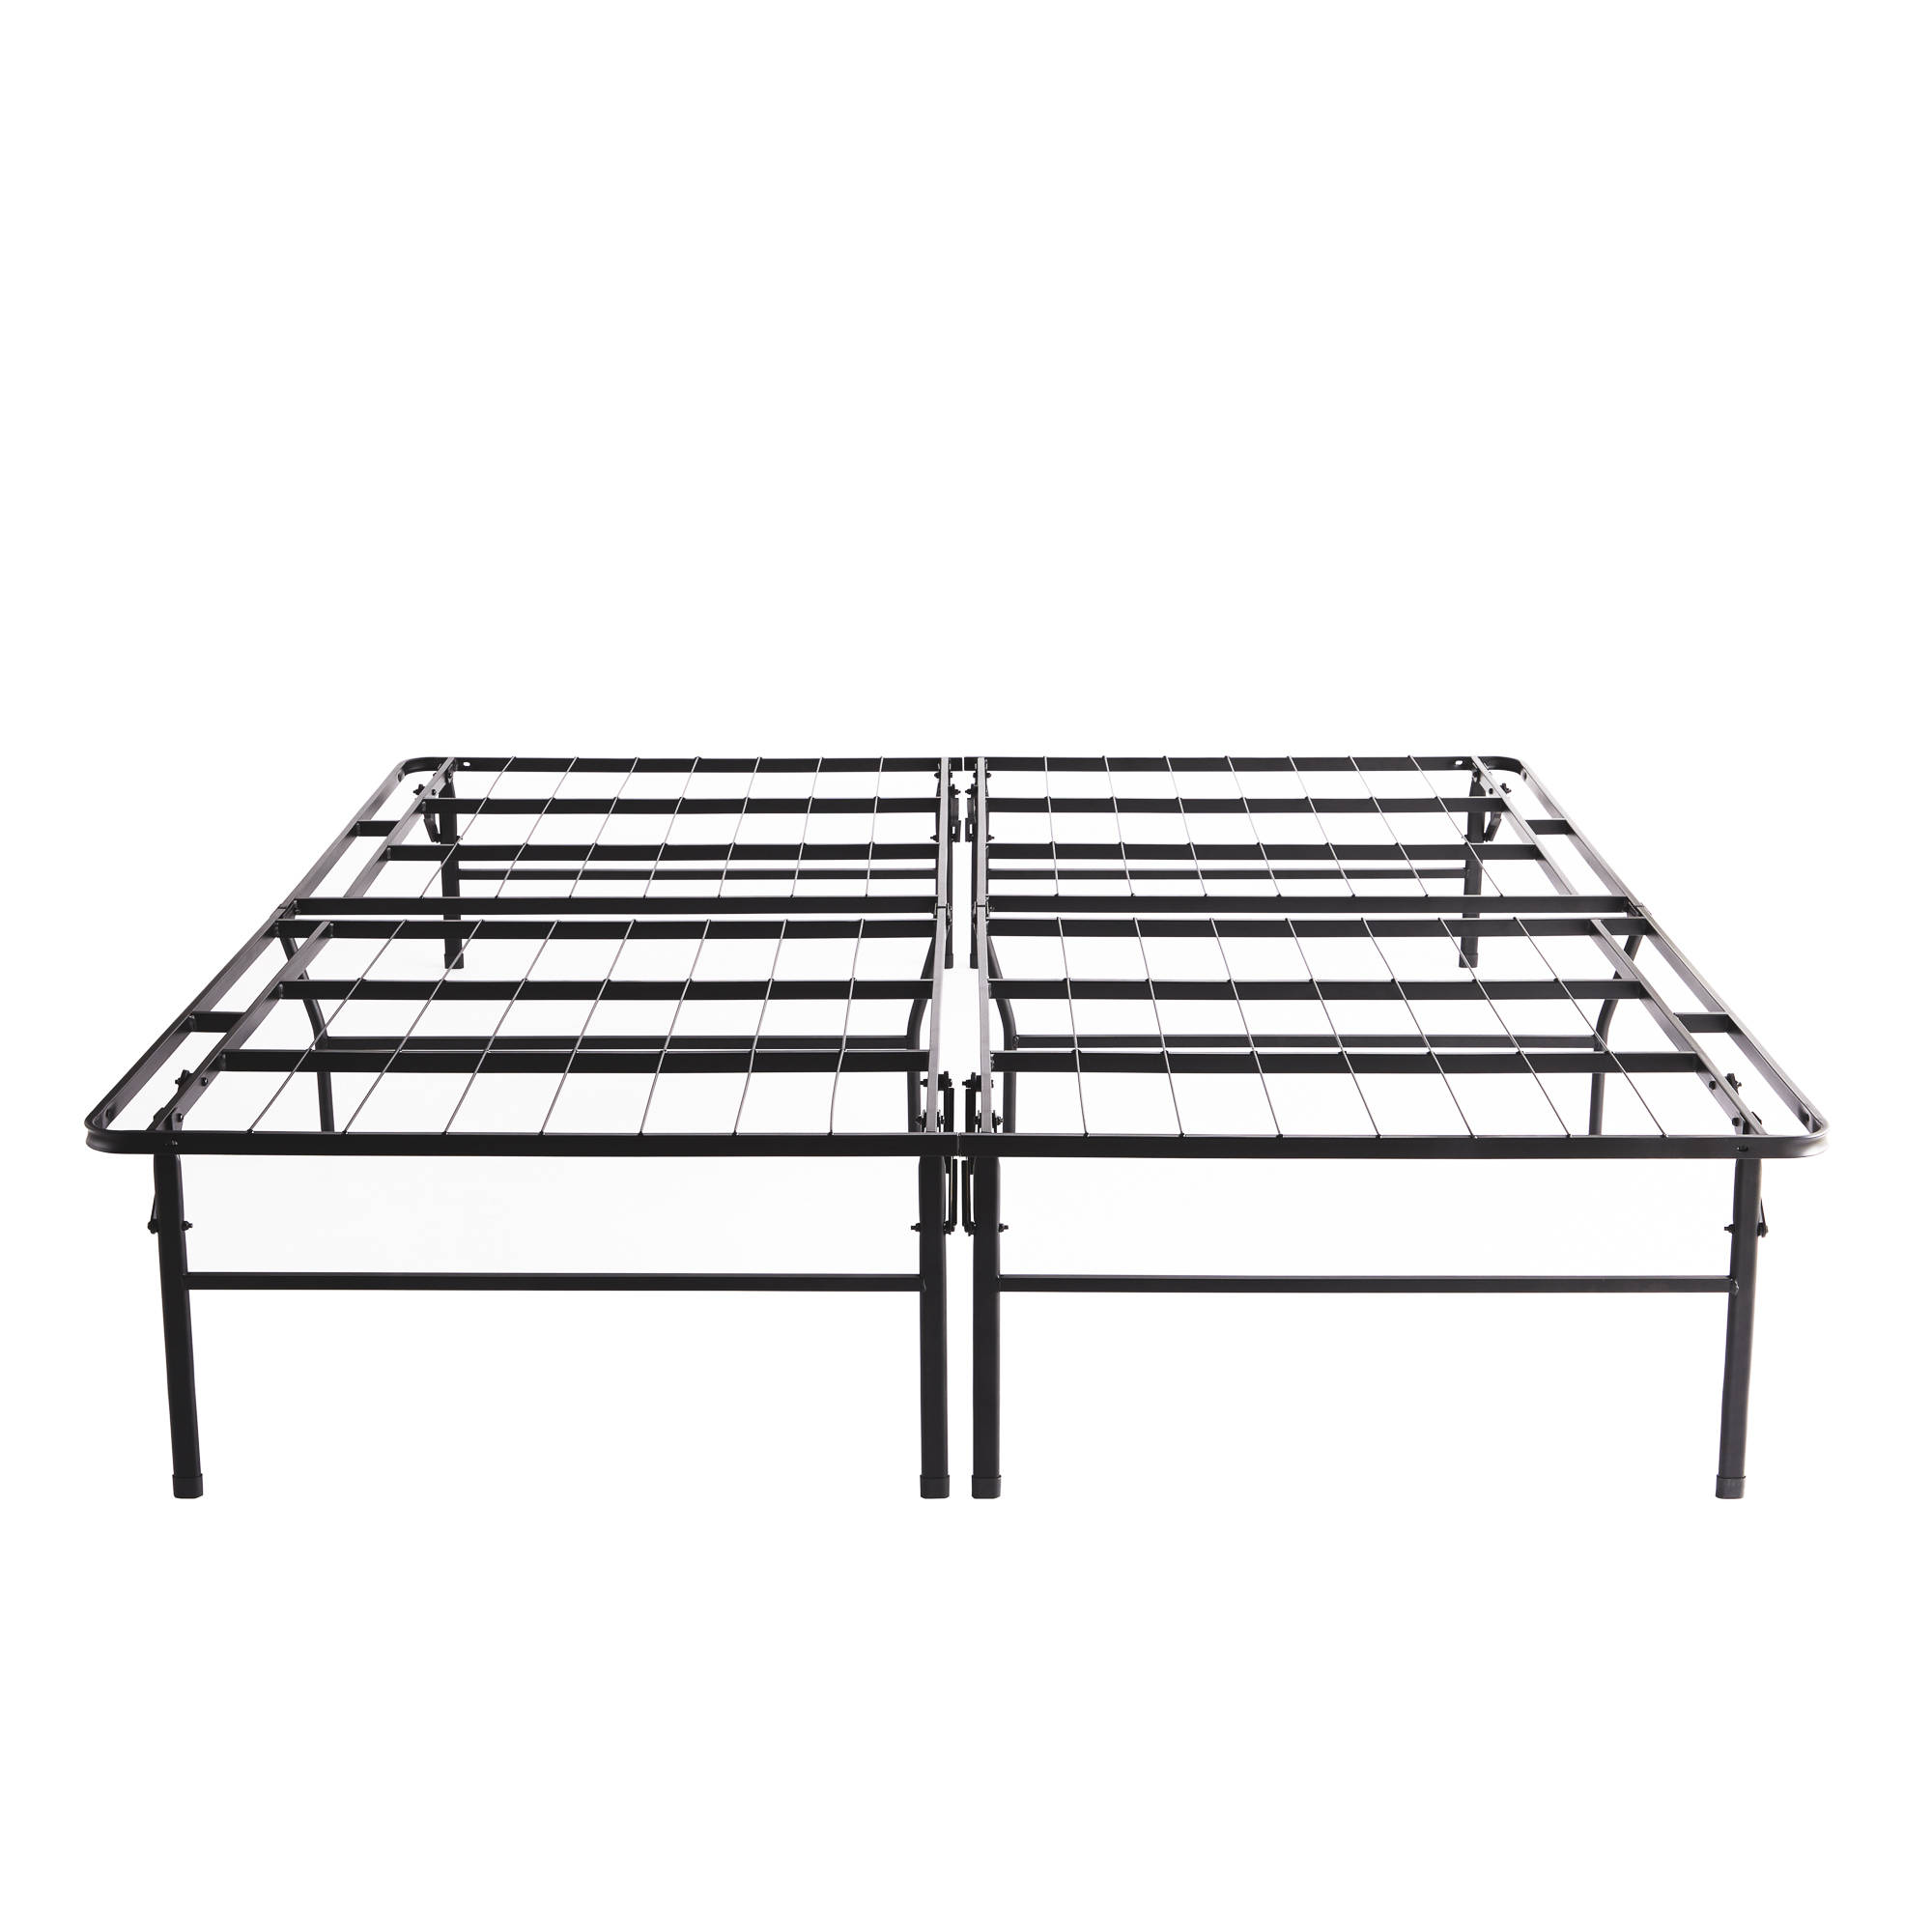 Malouf Structures Highrise Hd Bed Frame, Malouf Universal Bed Frame Instructions